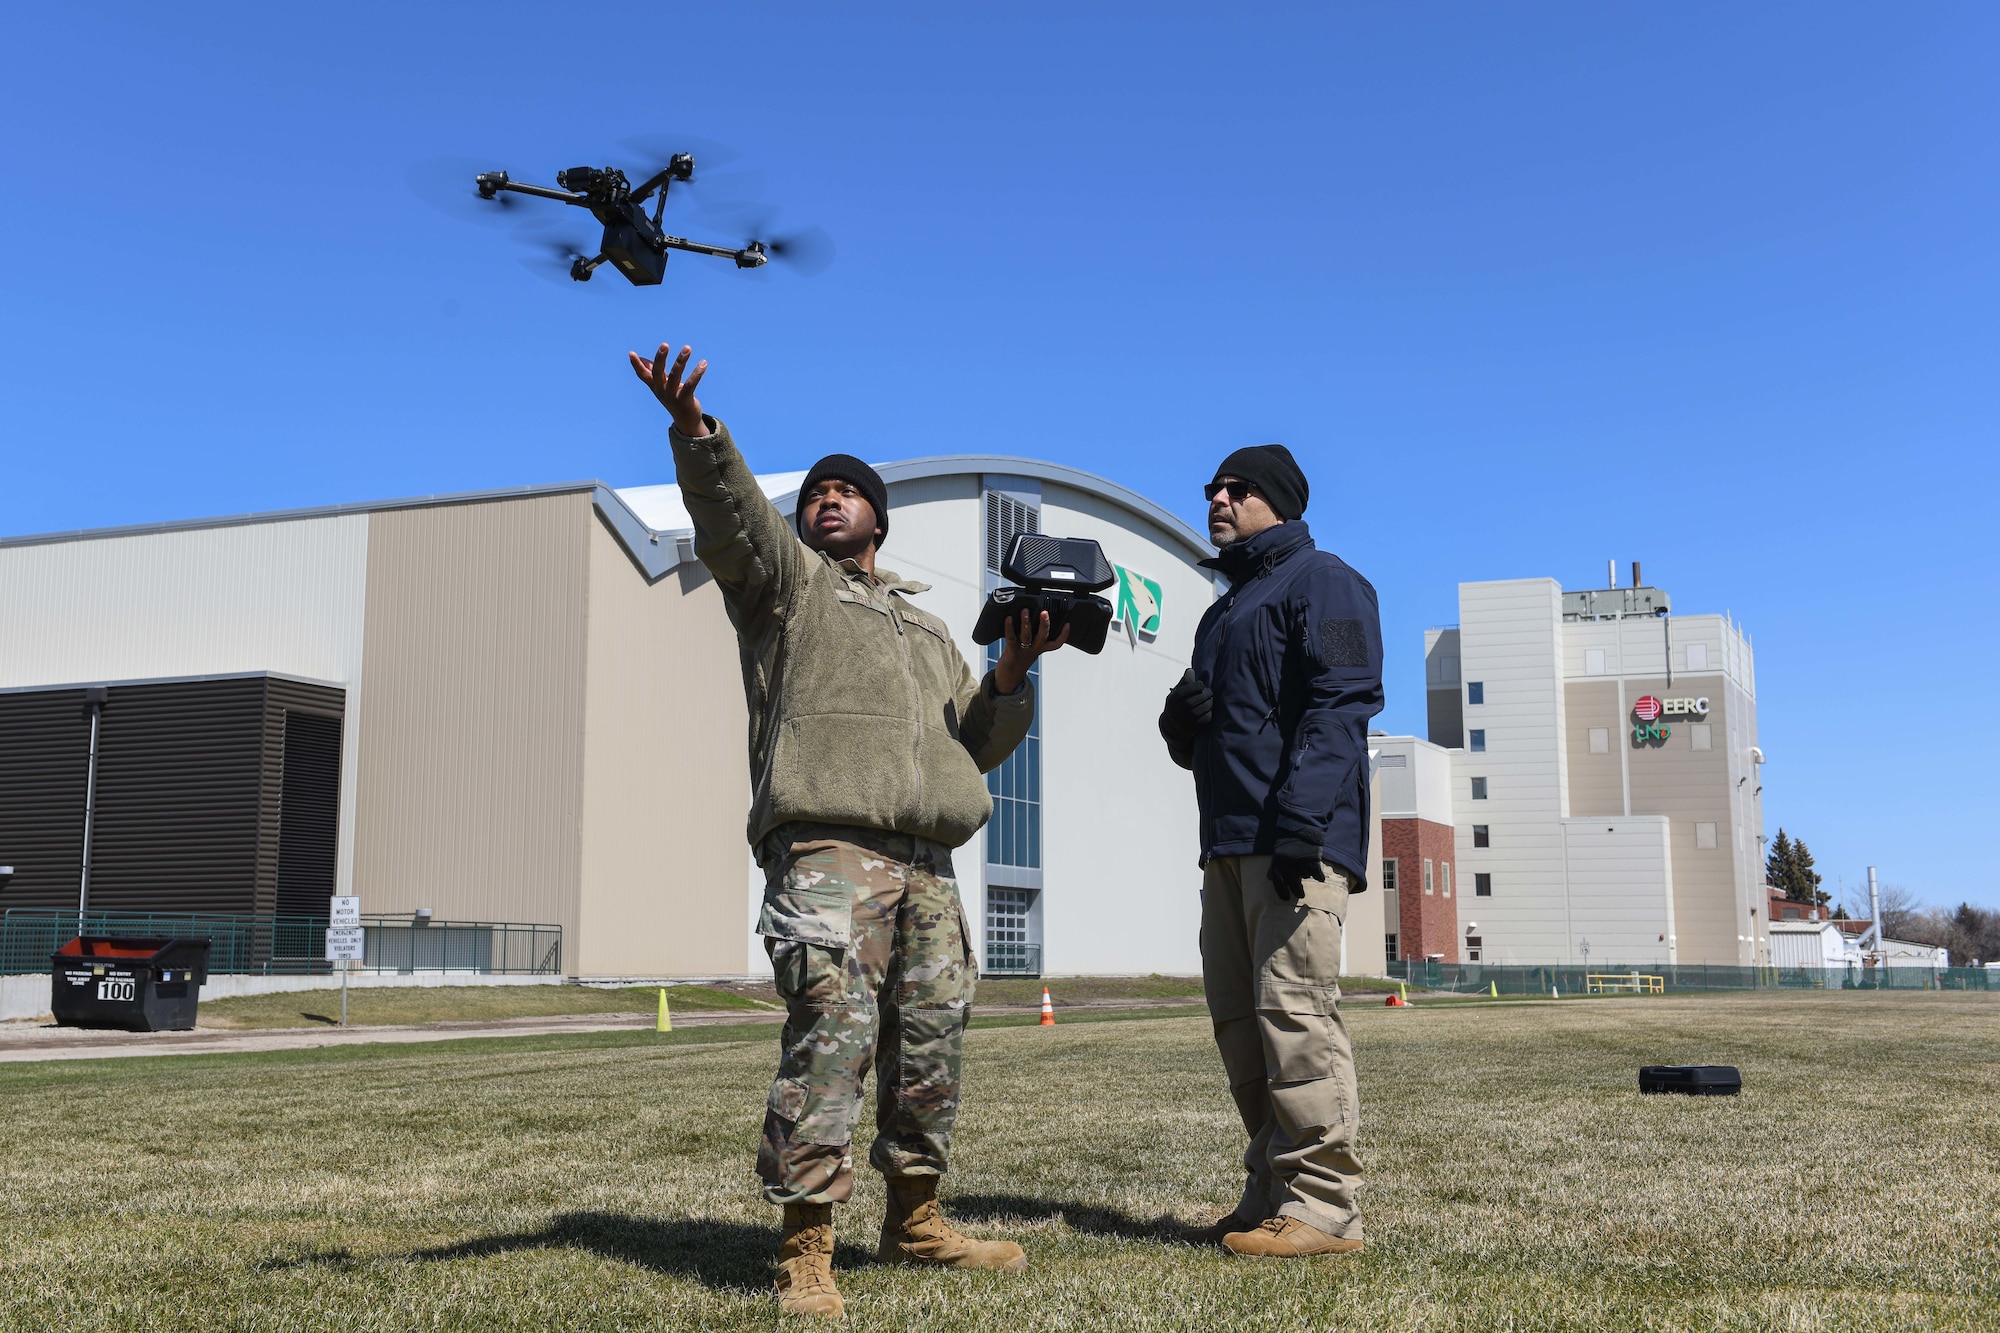 Senior Airman Marcus Kelly, 319th Security Forces Squadron base defense operations center controller, practices a drone landing during an unmanned aircraft system flight training course at the University of North Dakota, Grand Forks, North Dakota, April 27, 2022. Over the course of three days, members familiarized themselves with the drone features to potentially conduct daily operations more efficiently such as security patrol and incident response mission. (U.S. Air Force photo by Senior Airman Ashley Richards)